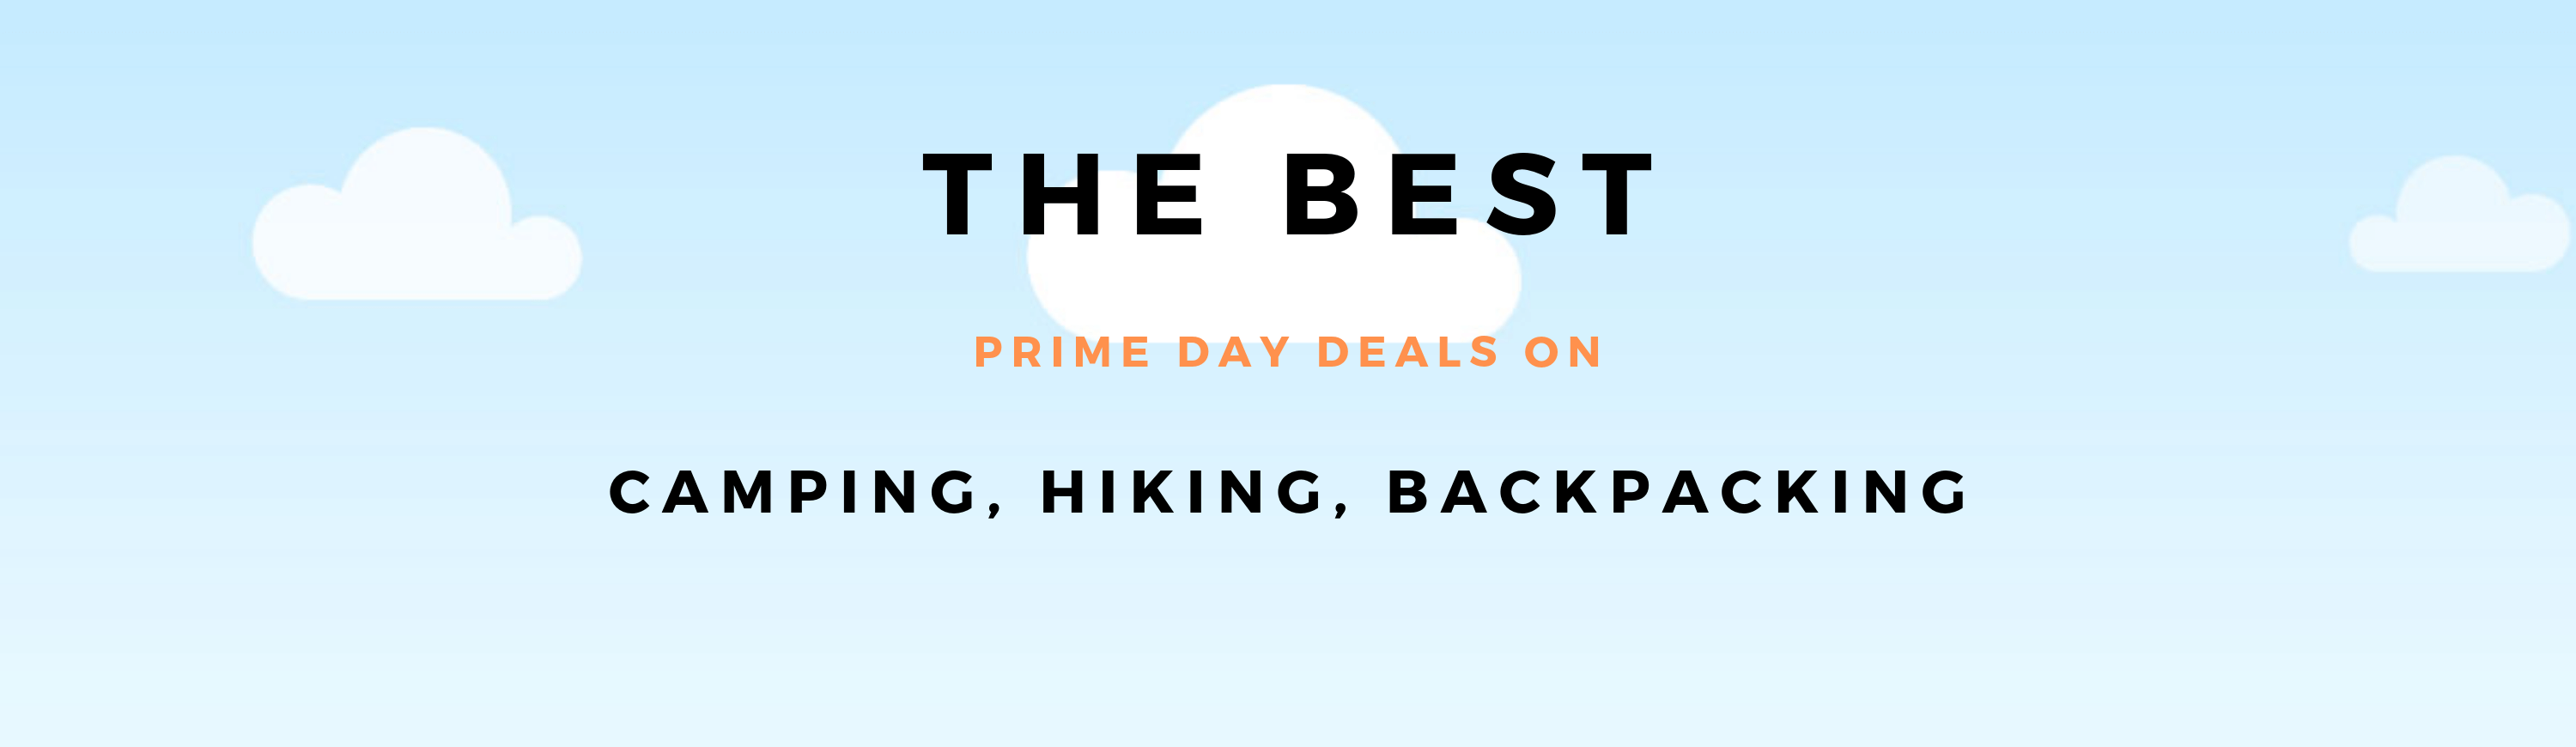 best primeday deals on camping, hiking and backpacking